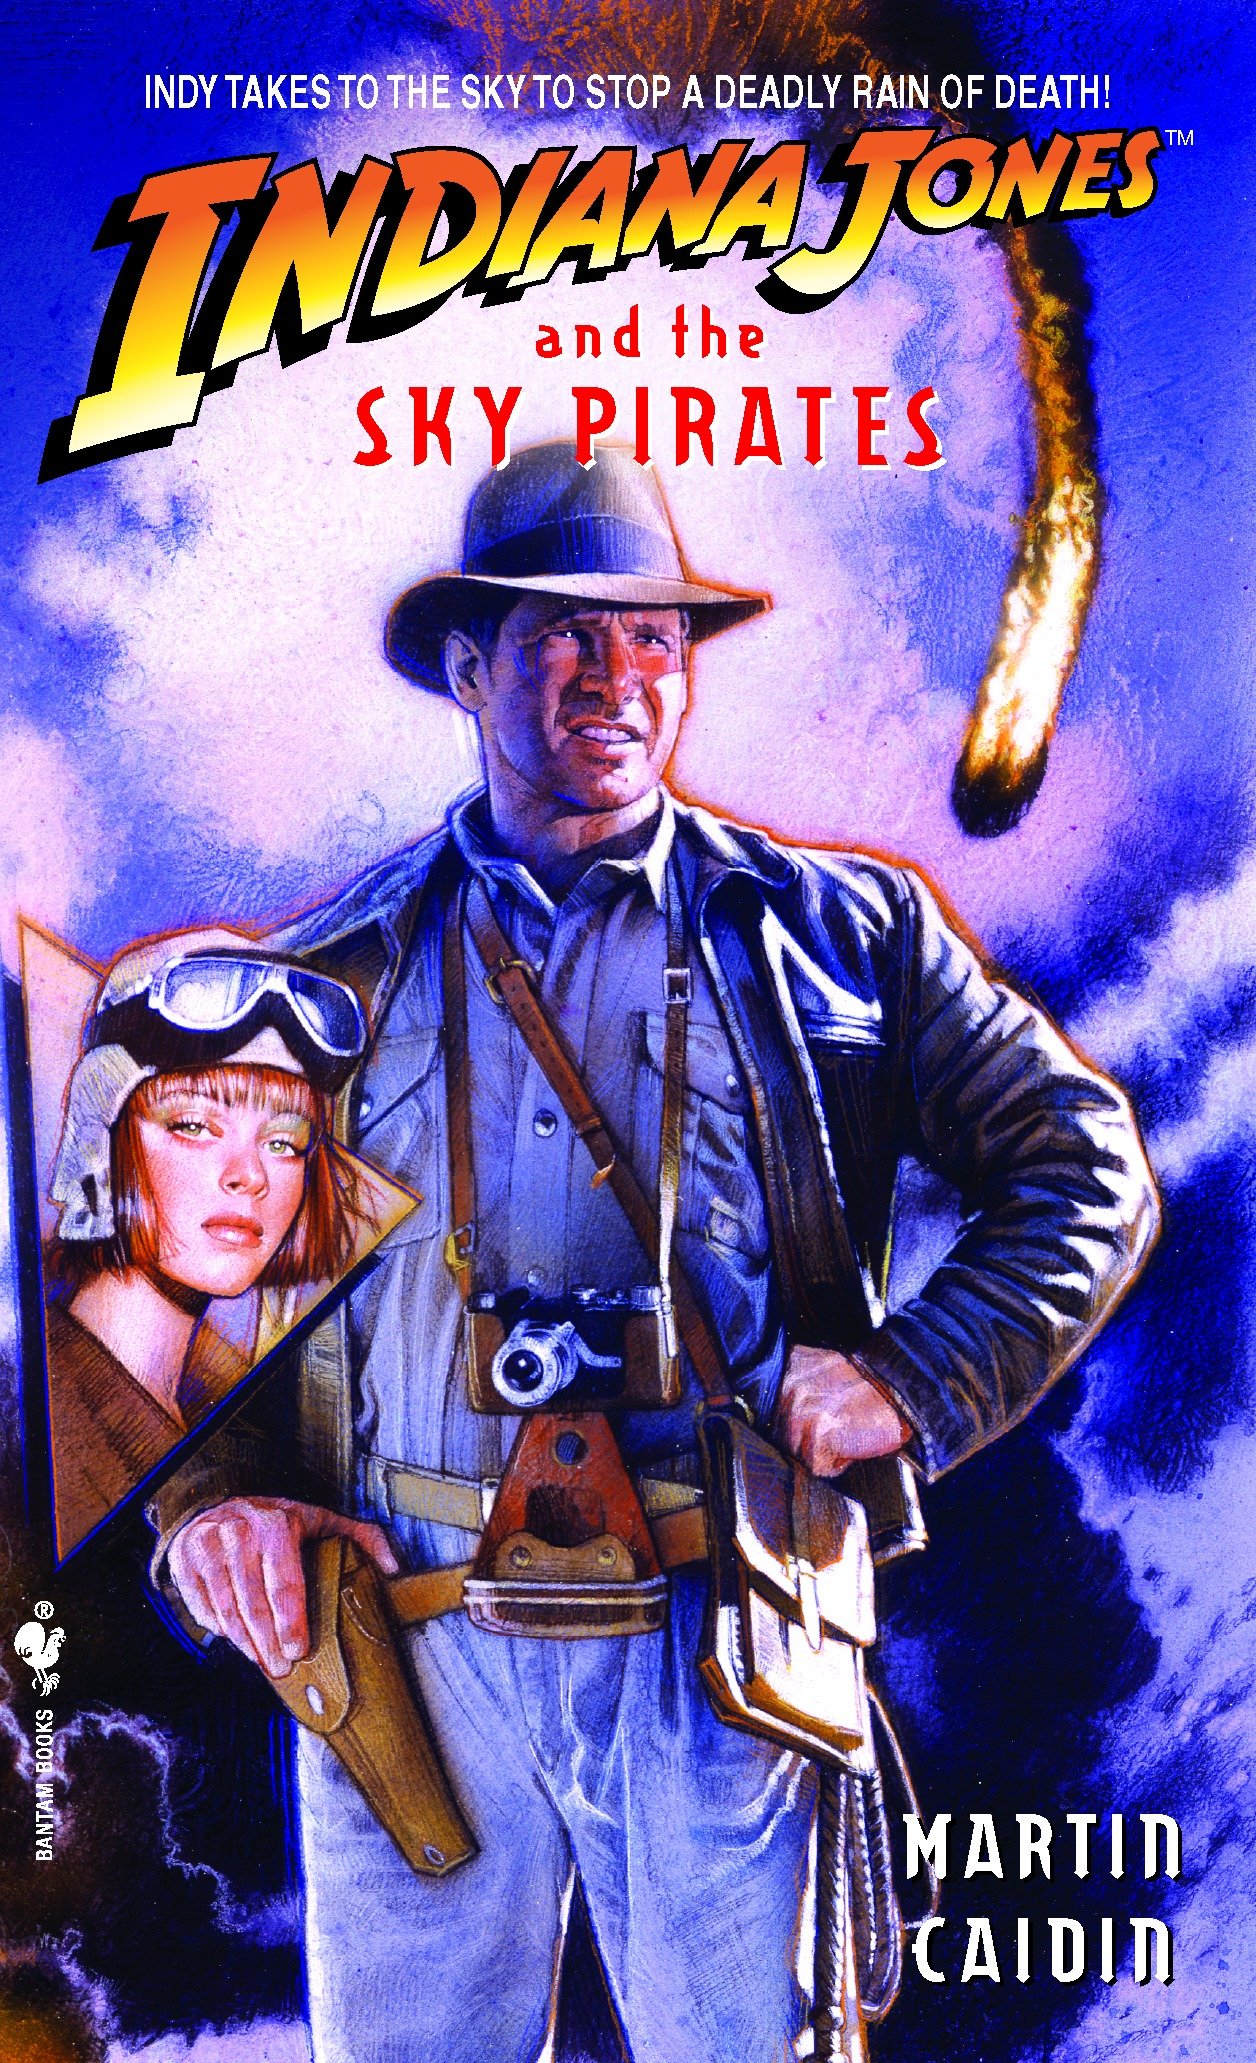 Indiana Jones and the Sky Pirates - image 1 of 1